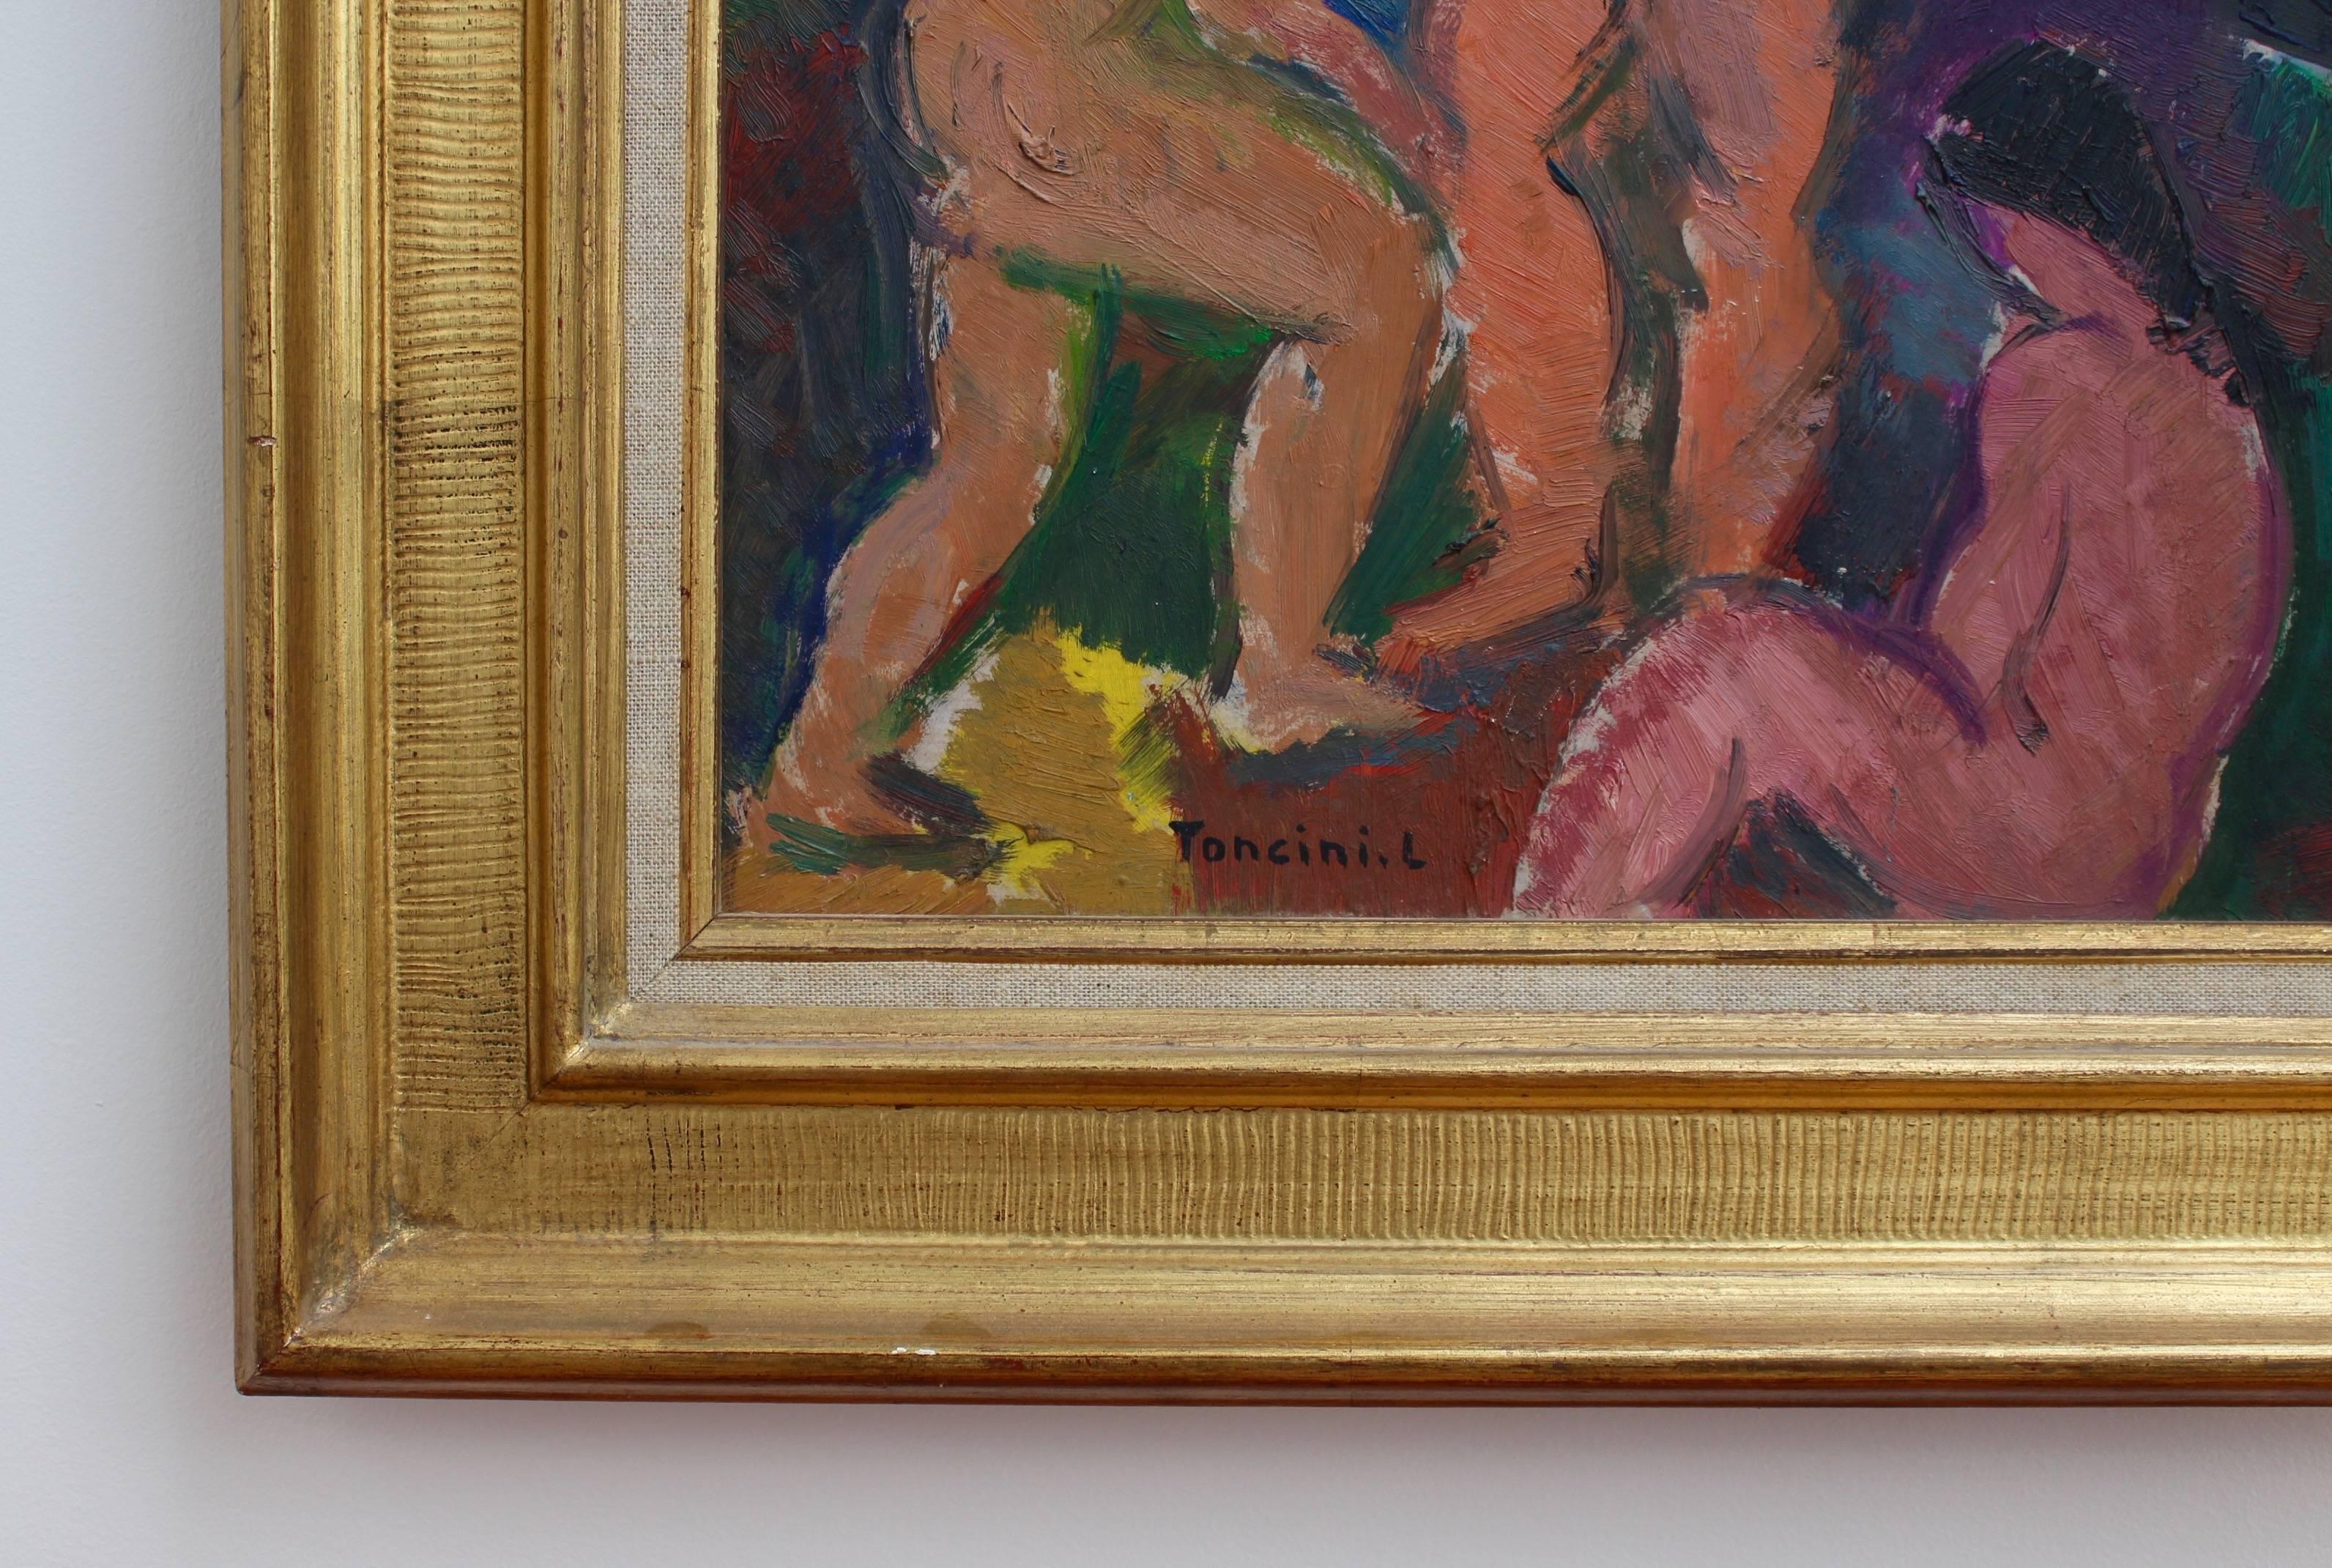 'Three Nude Women', oil on board, in original frame, by Louis Toncini (1907 - 2002). This effervescent depiction of three nude women (c. 1960s) certainly was inspired by Picasso's groundbreaking cubist work, 'Les Demoiselles d'Avignon'. In Picasso's